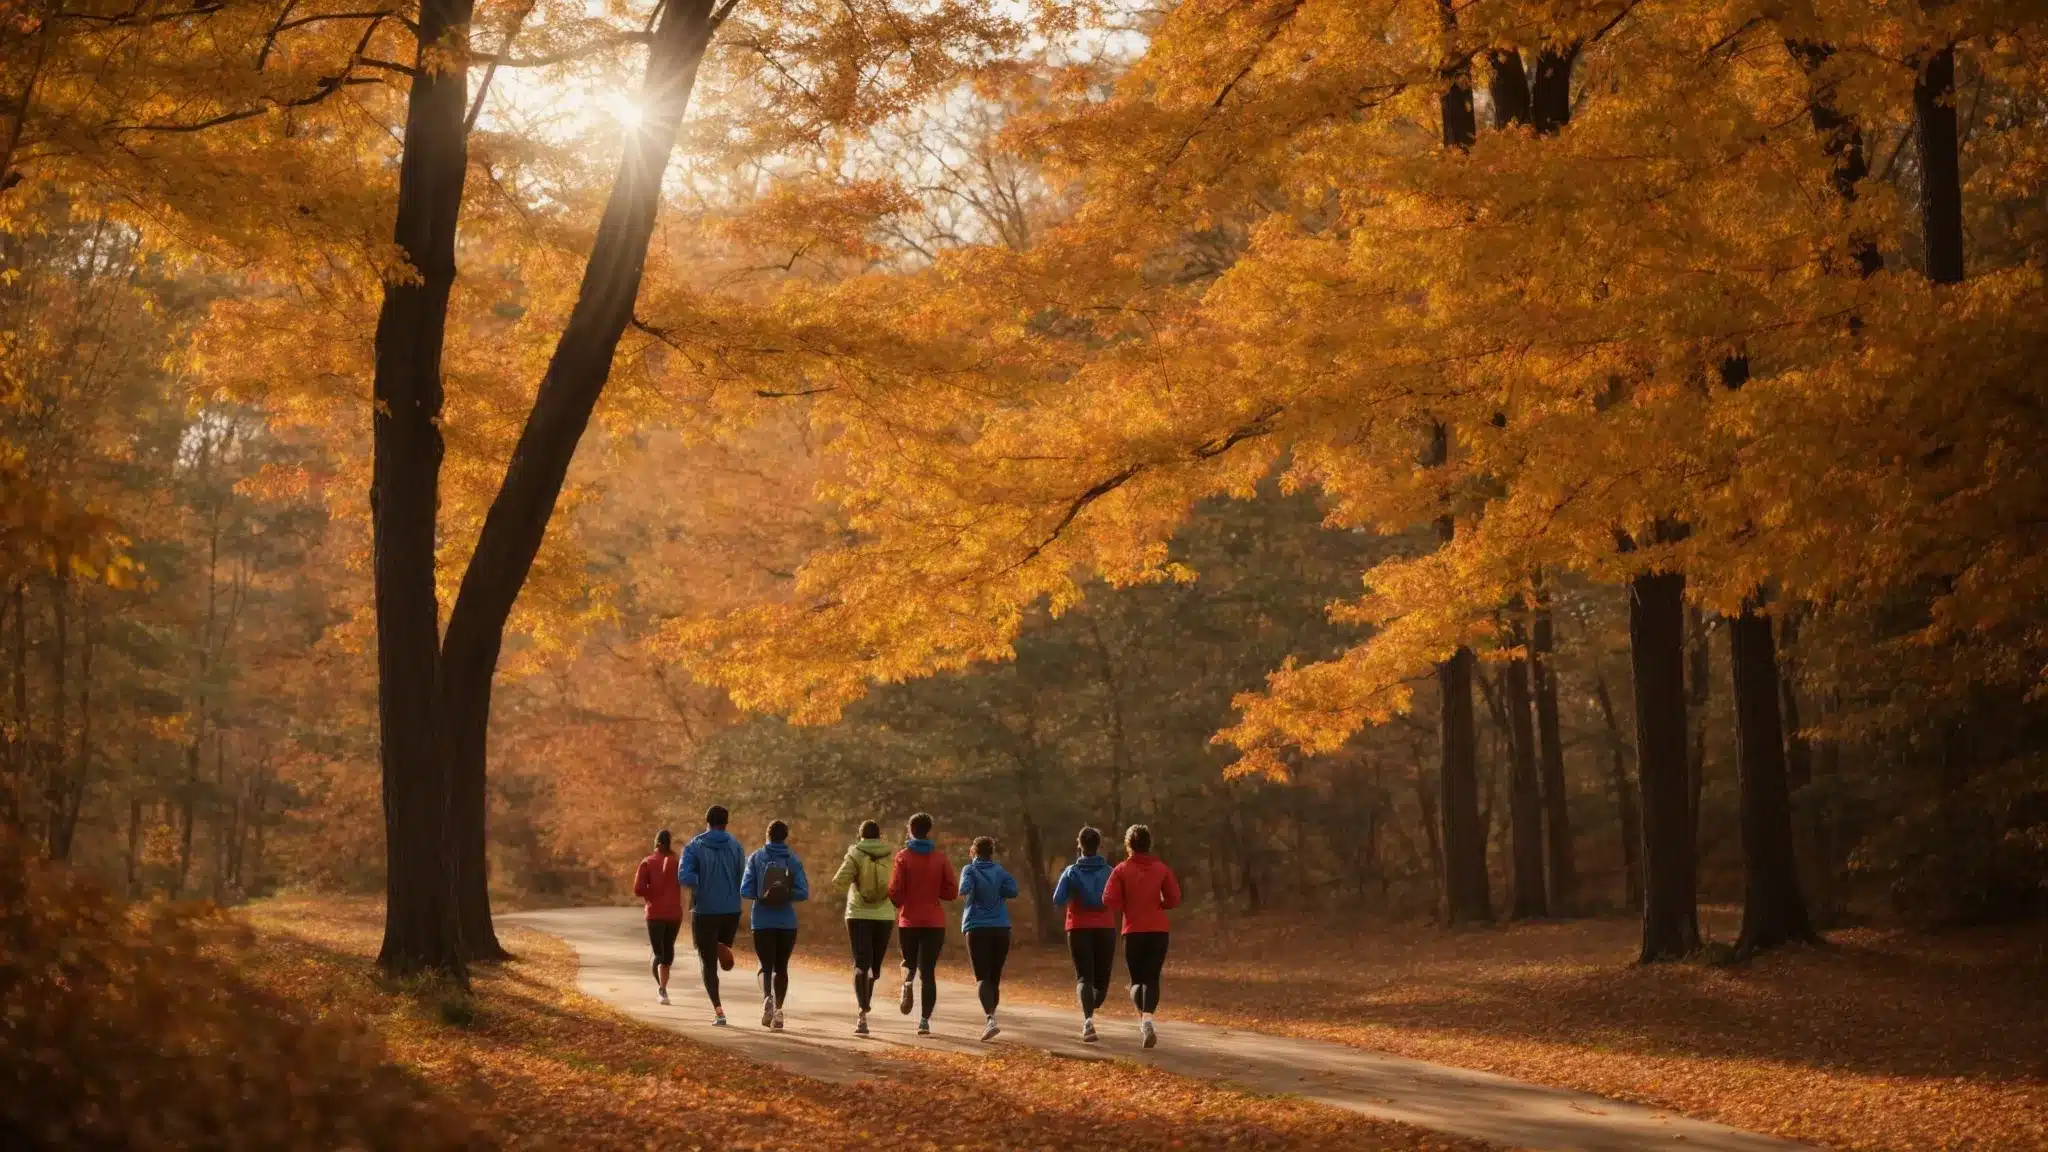 "charlotte residents jogging on a serene trail surrounded by autumn foliage."